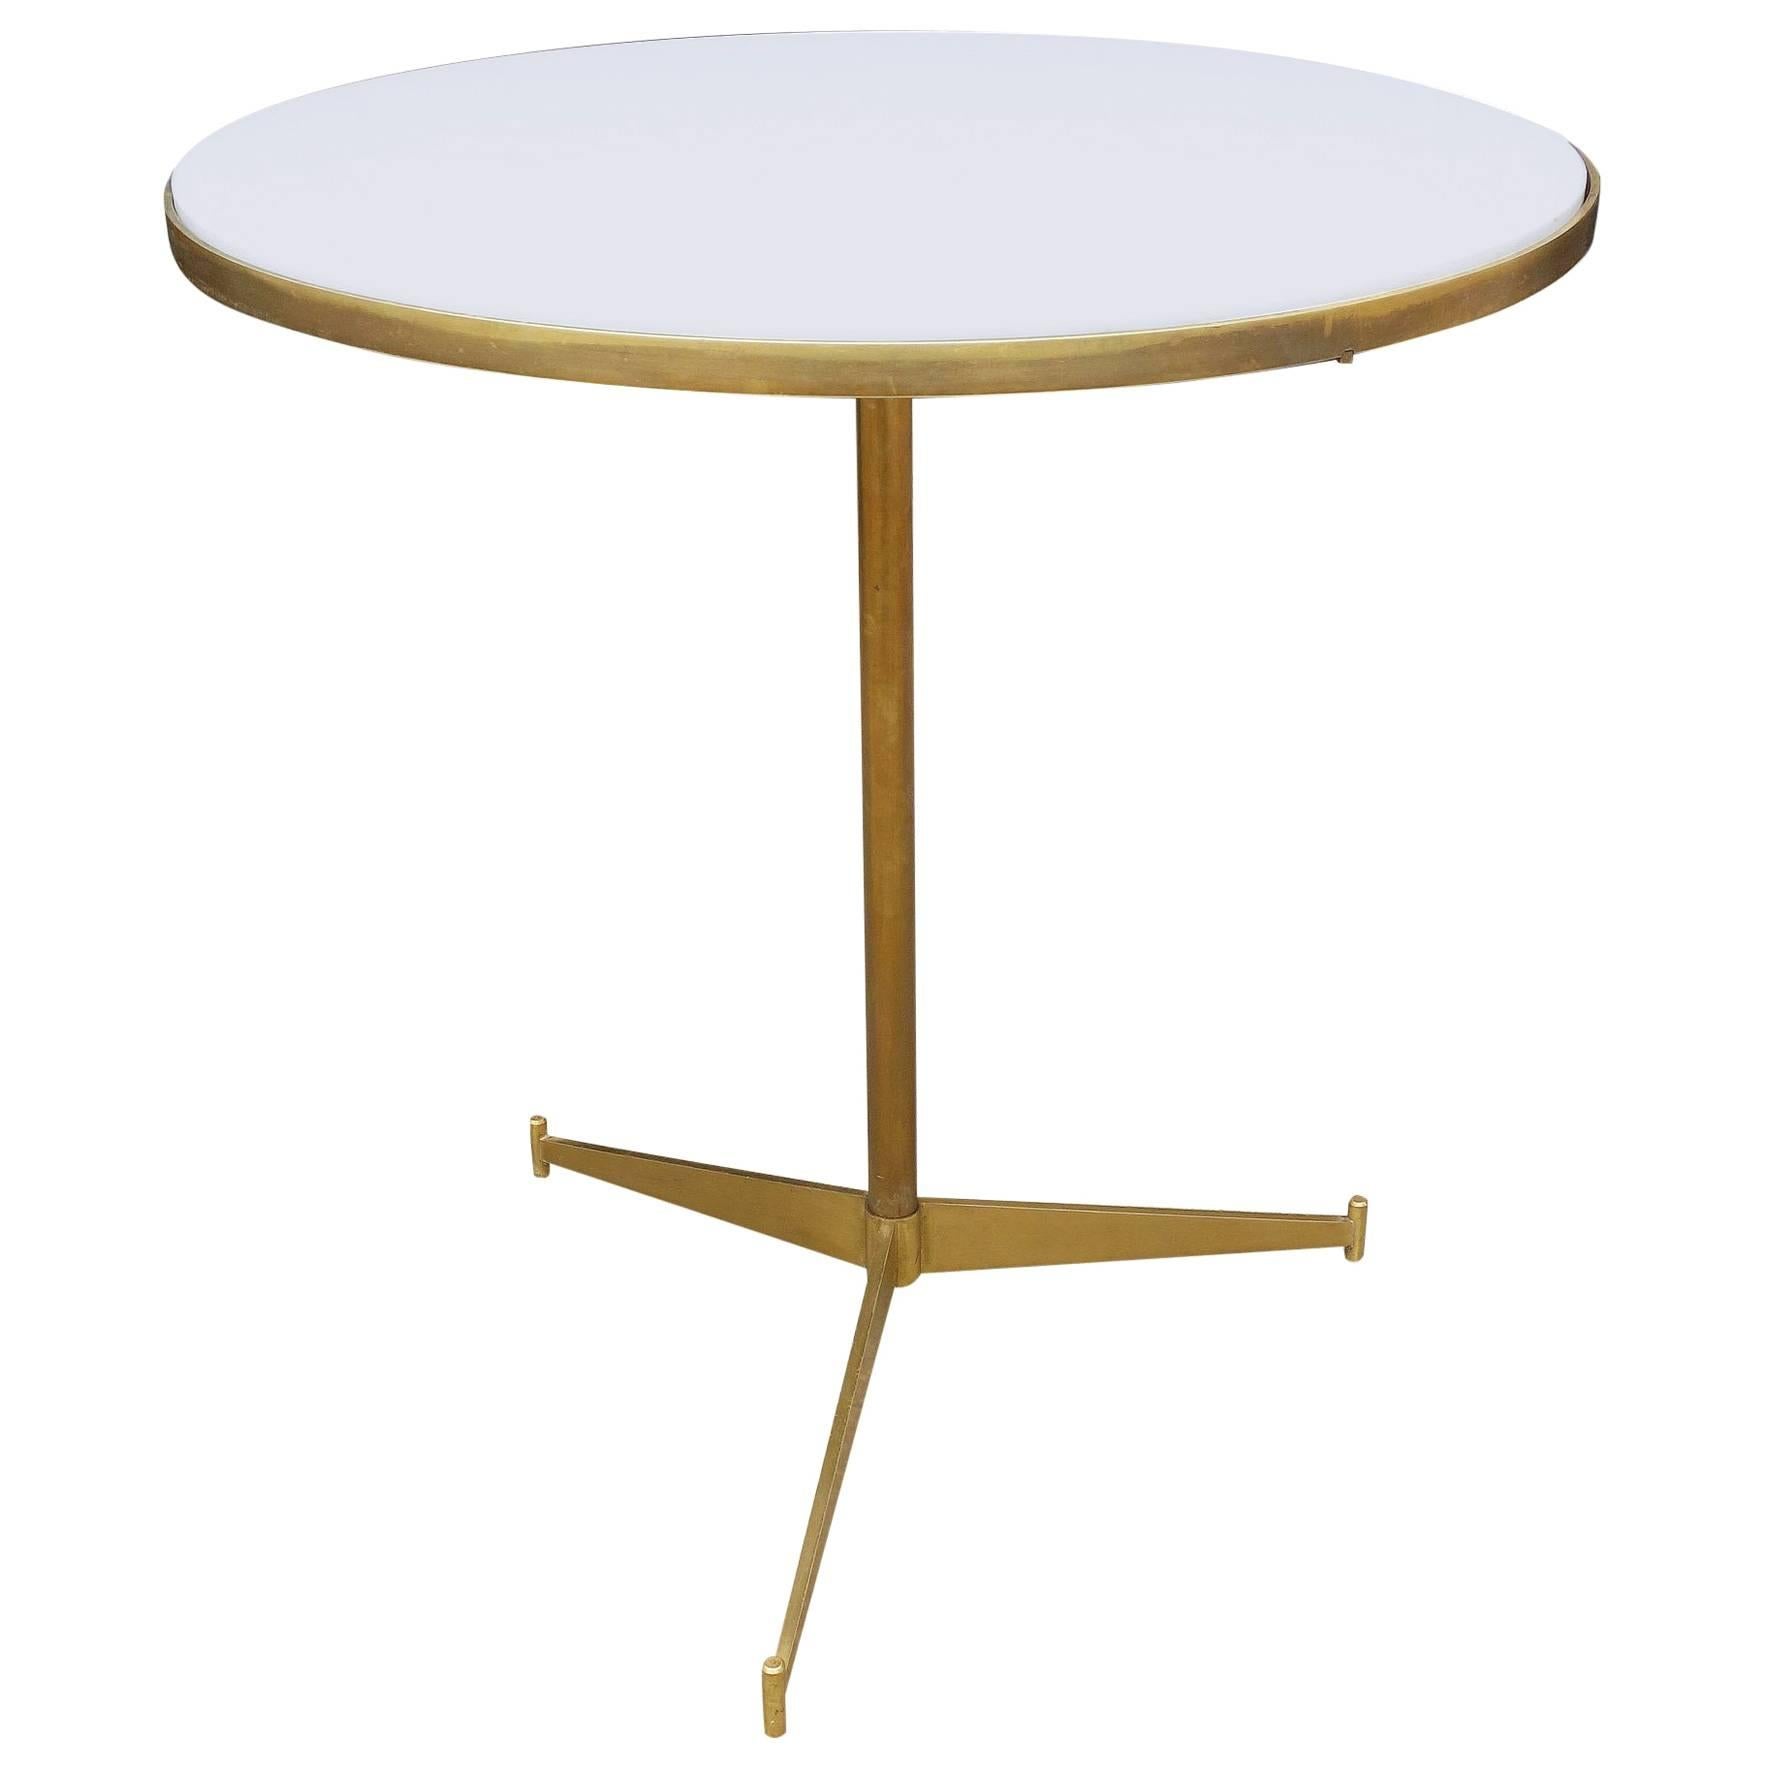 Midcentury Paul McCobb Side Table for Directional